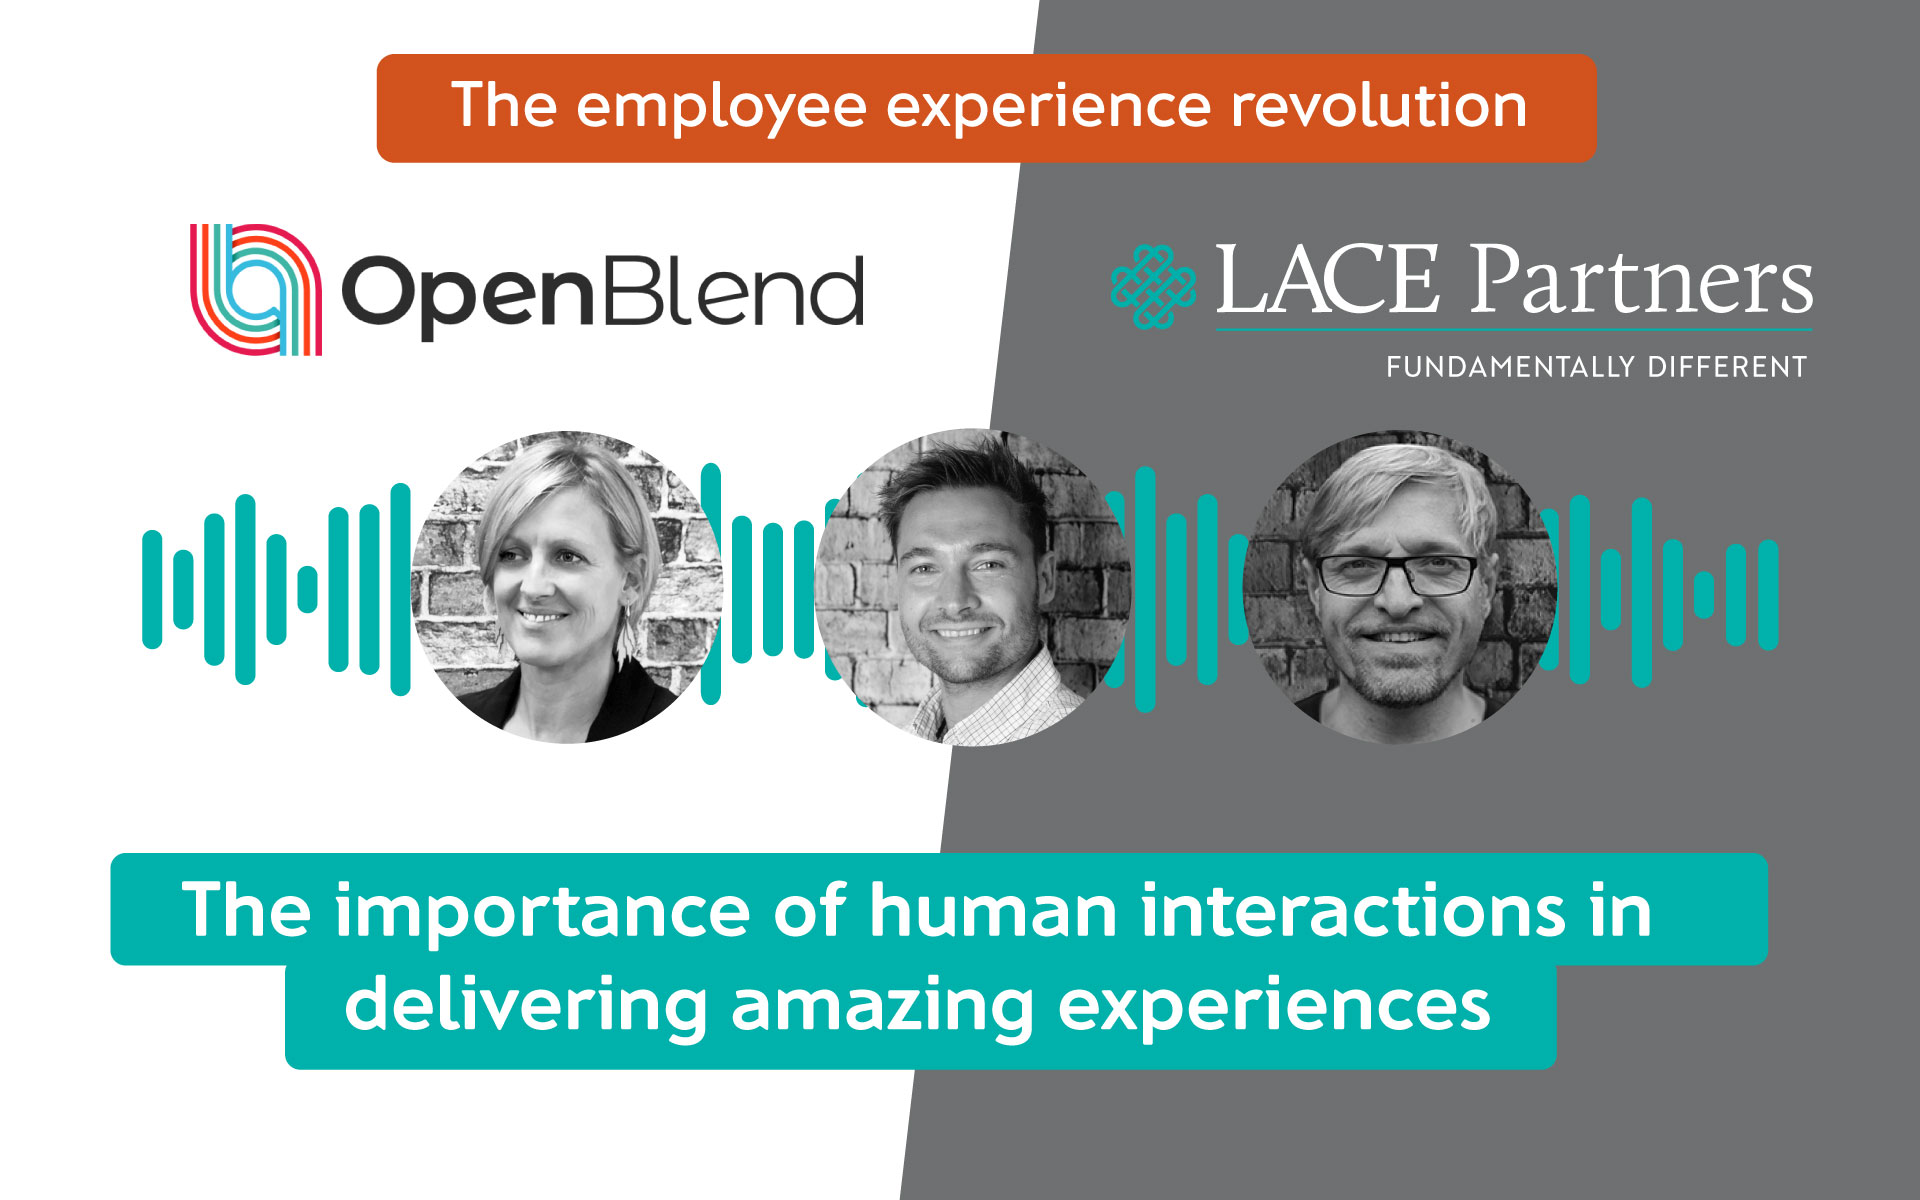 The importance of human interactions in delivering amazing experiences